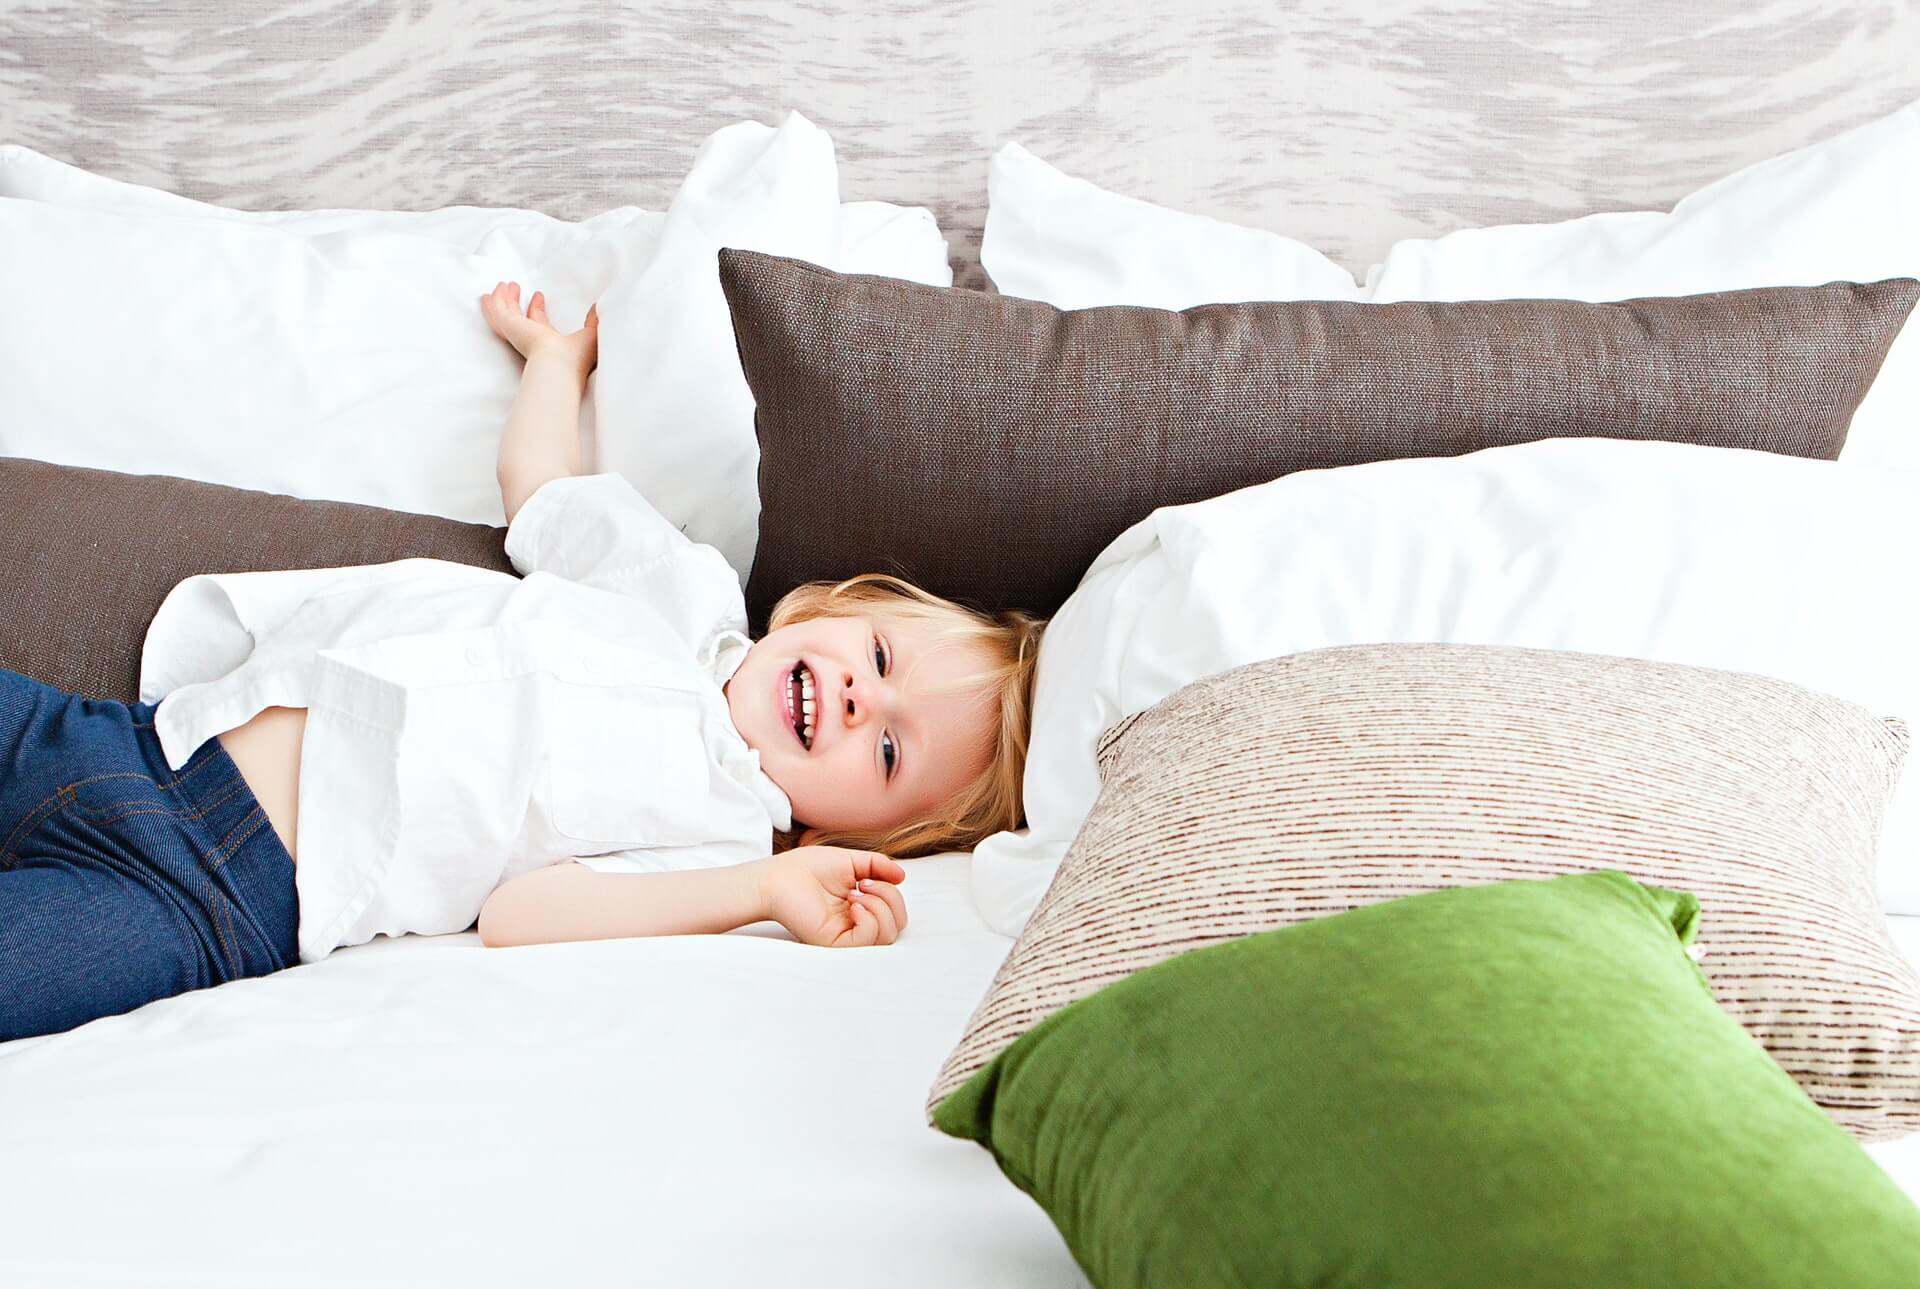 The Top 7 family-friendly hotels in the UK where children stay free